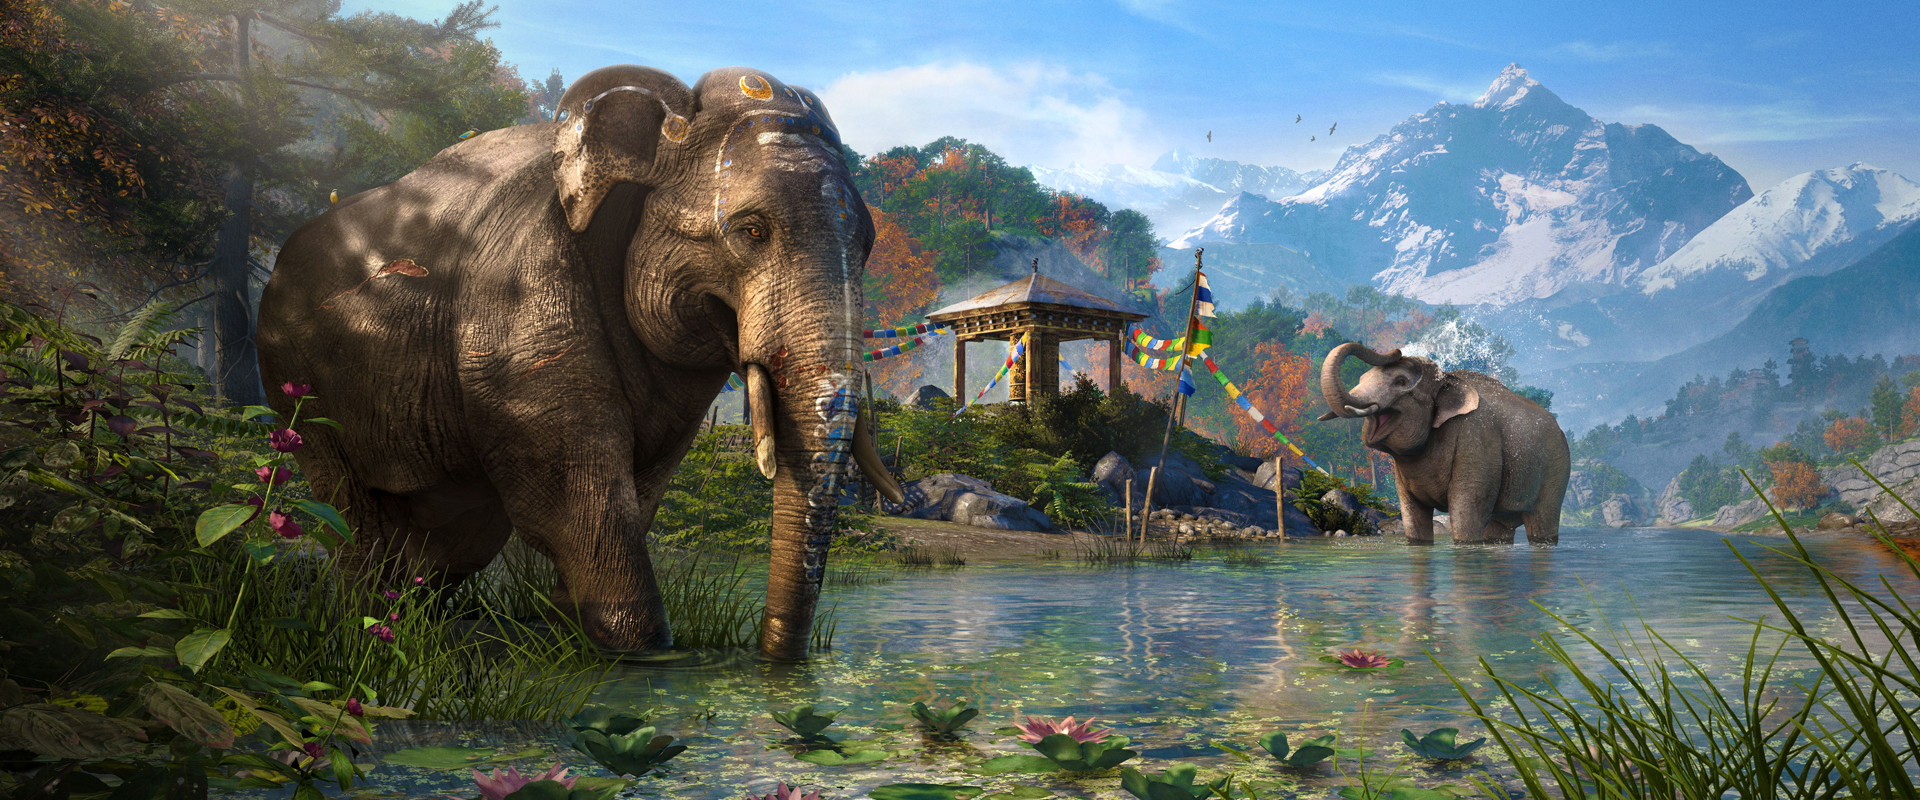 Far Cry 4 Review Its Déjà Vu All Over Again And I Love It Ars Technica 